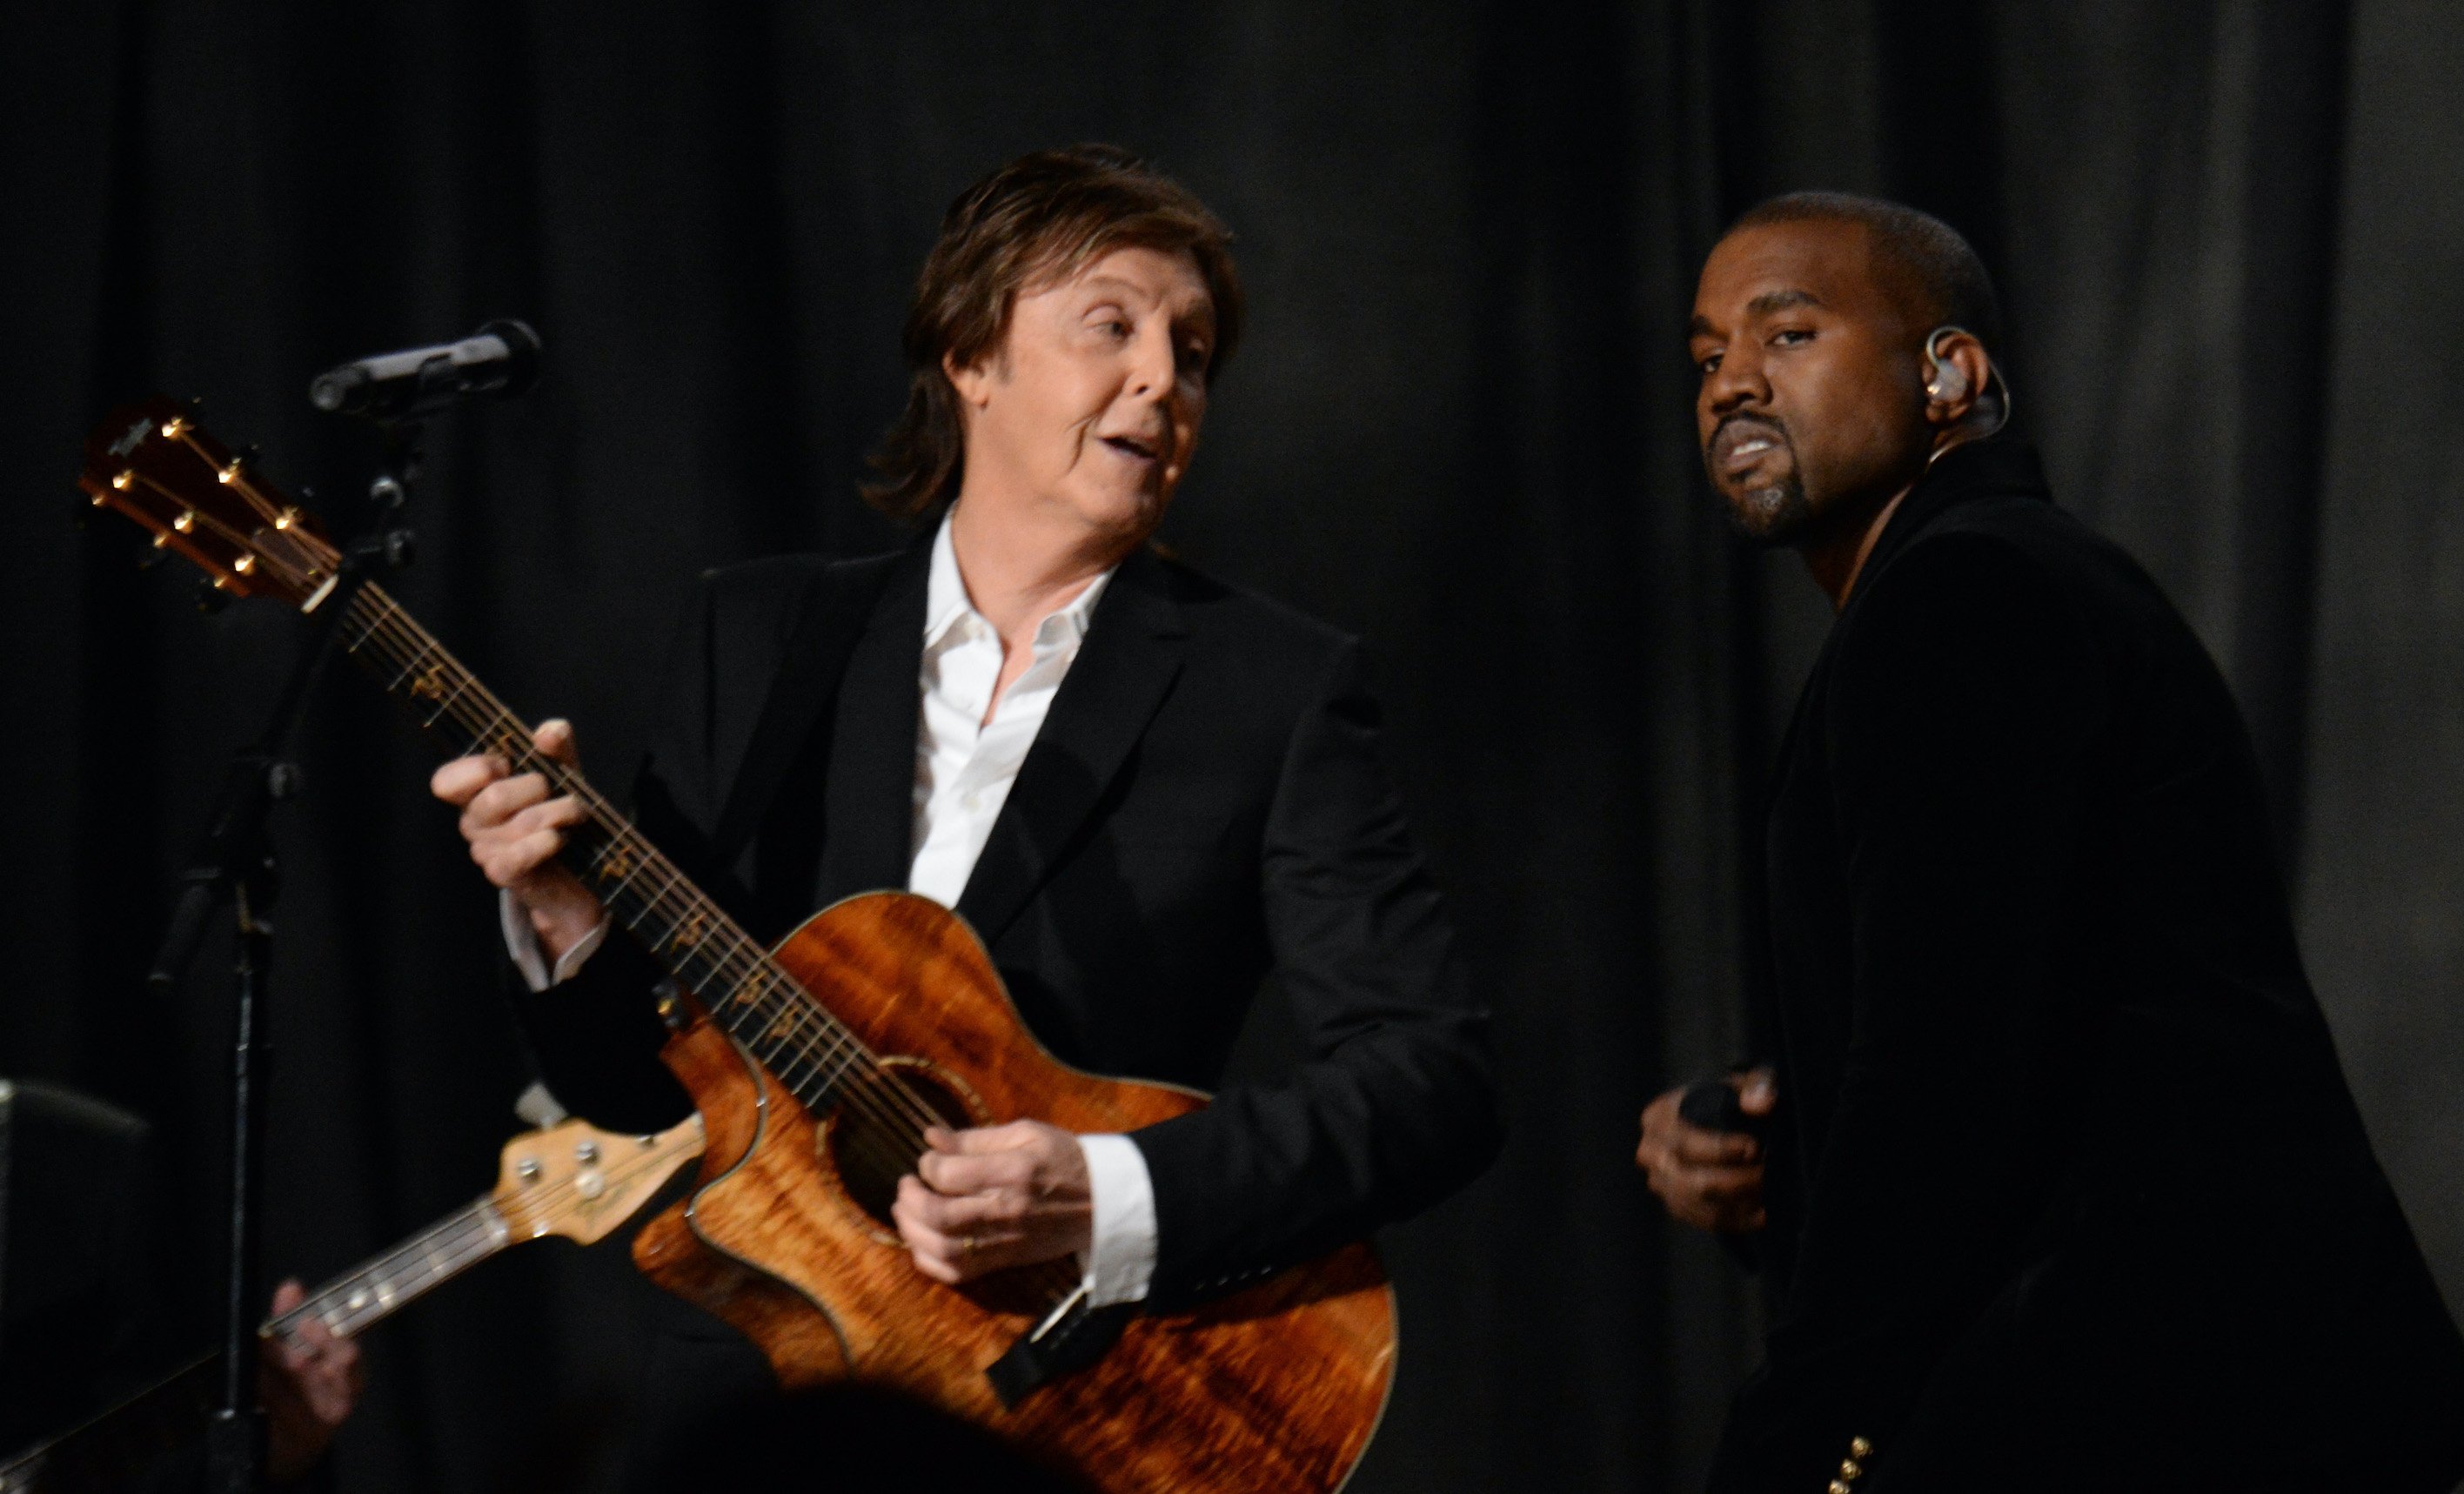 Paul McCartney and Kanye West performing onstage at the 57th annual Grammy Awards